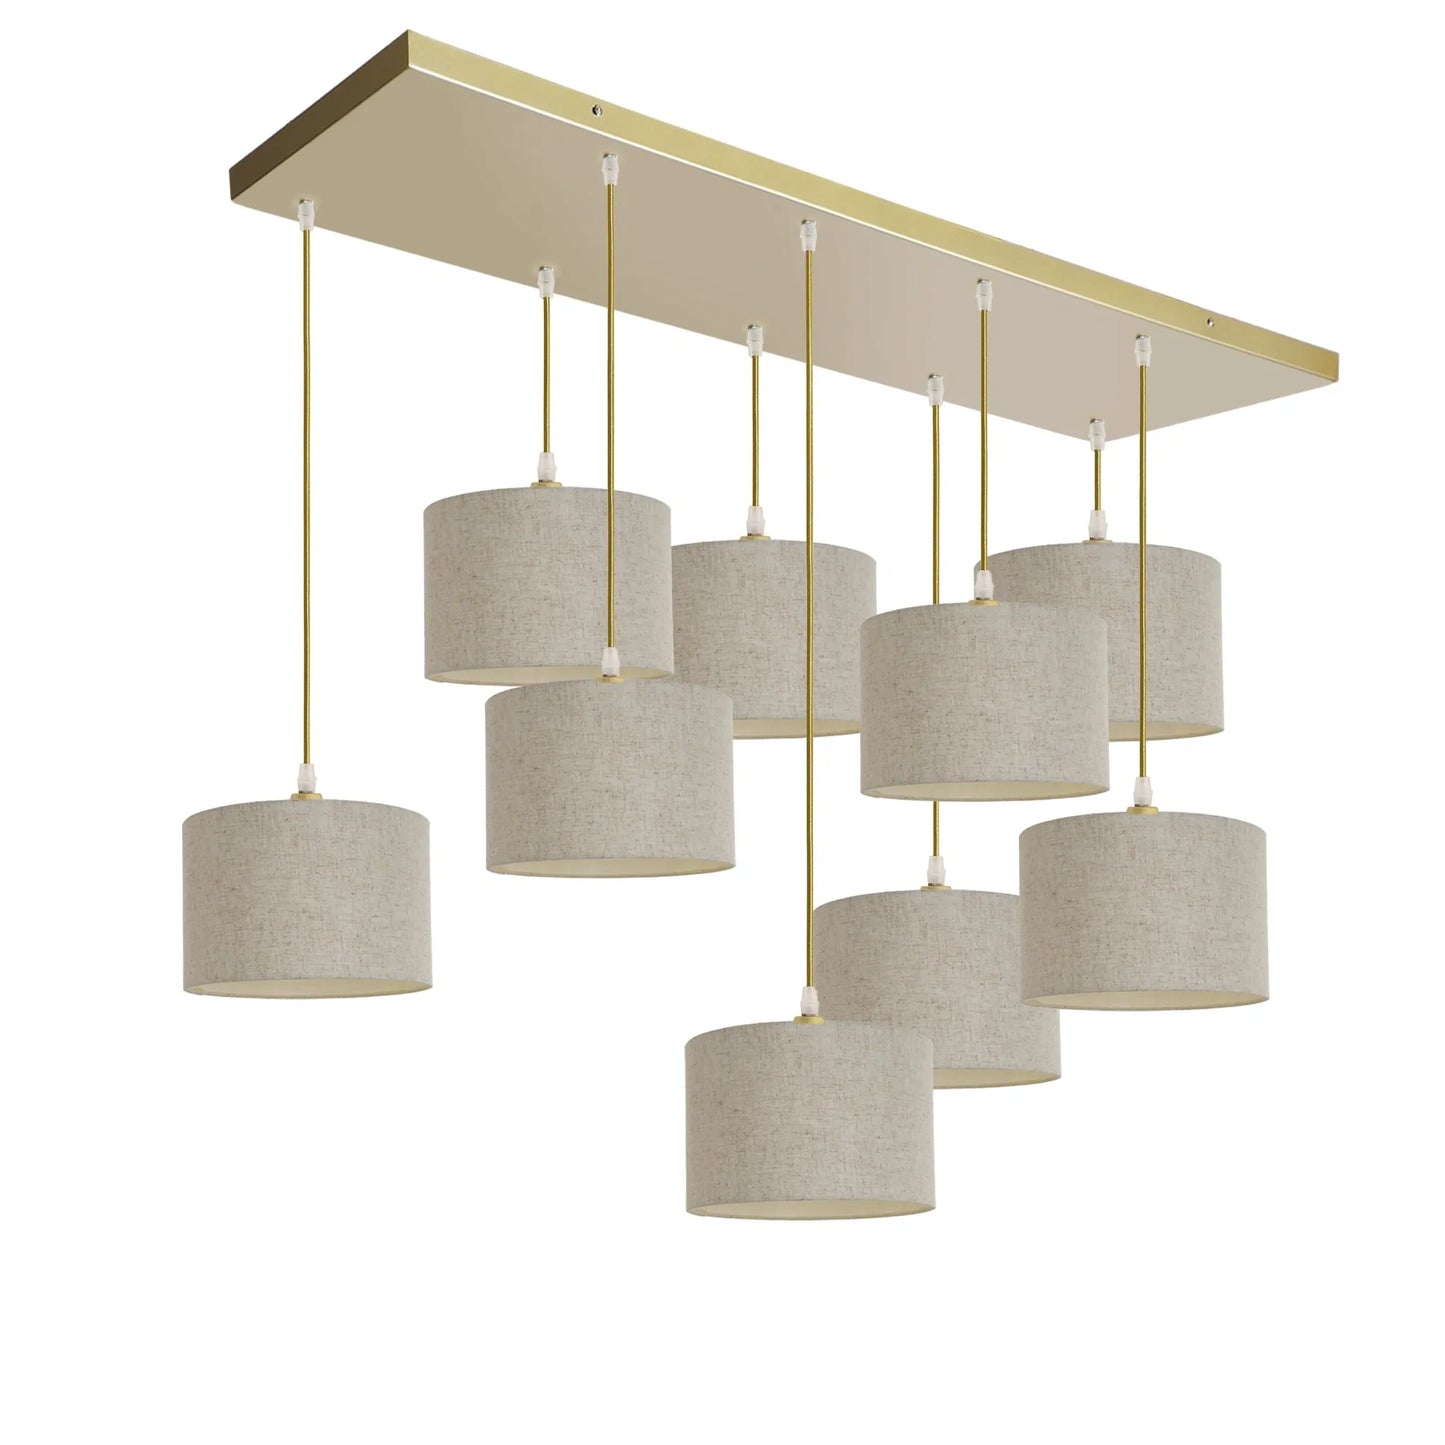 Murano 9 Light Gold with Hand Made Fabric Shades